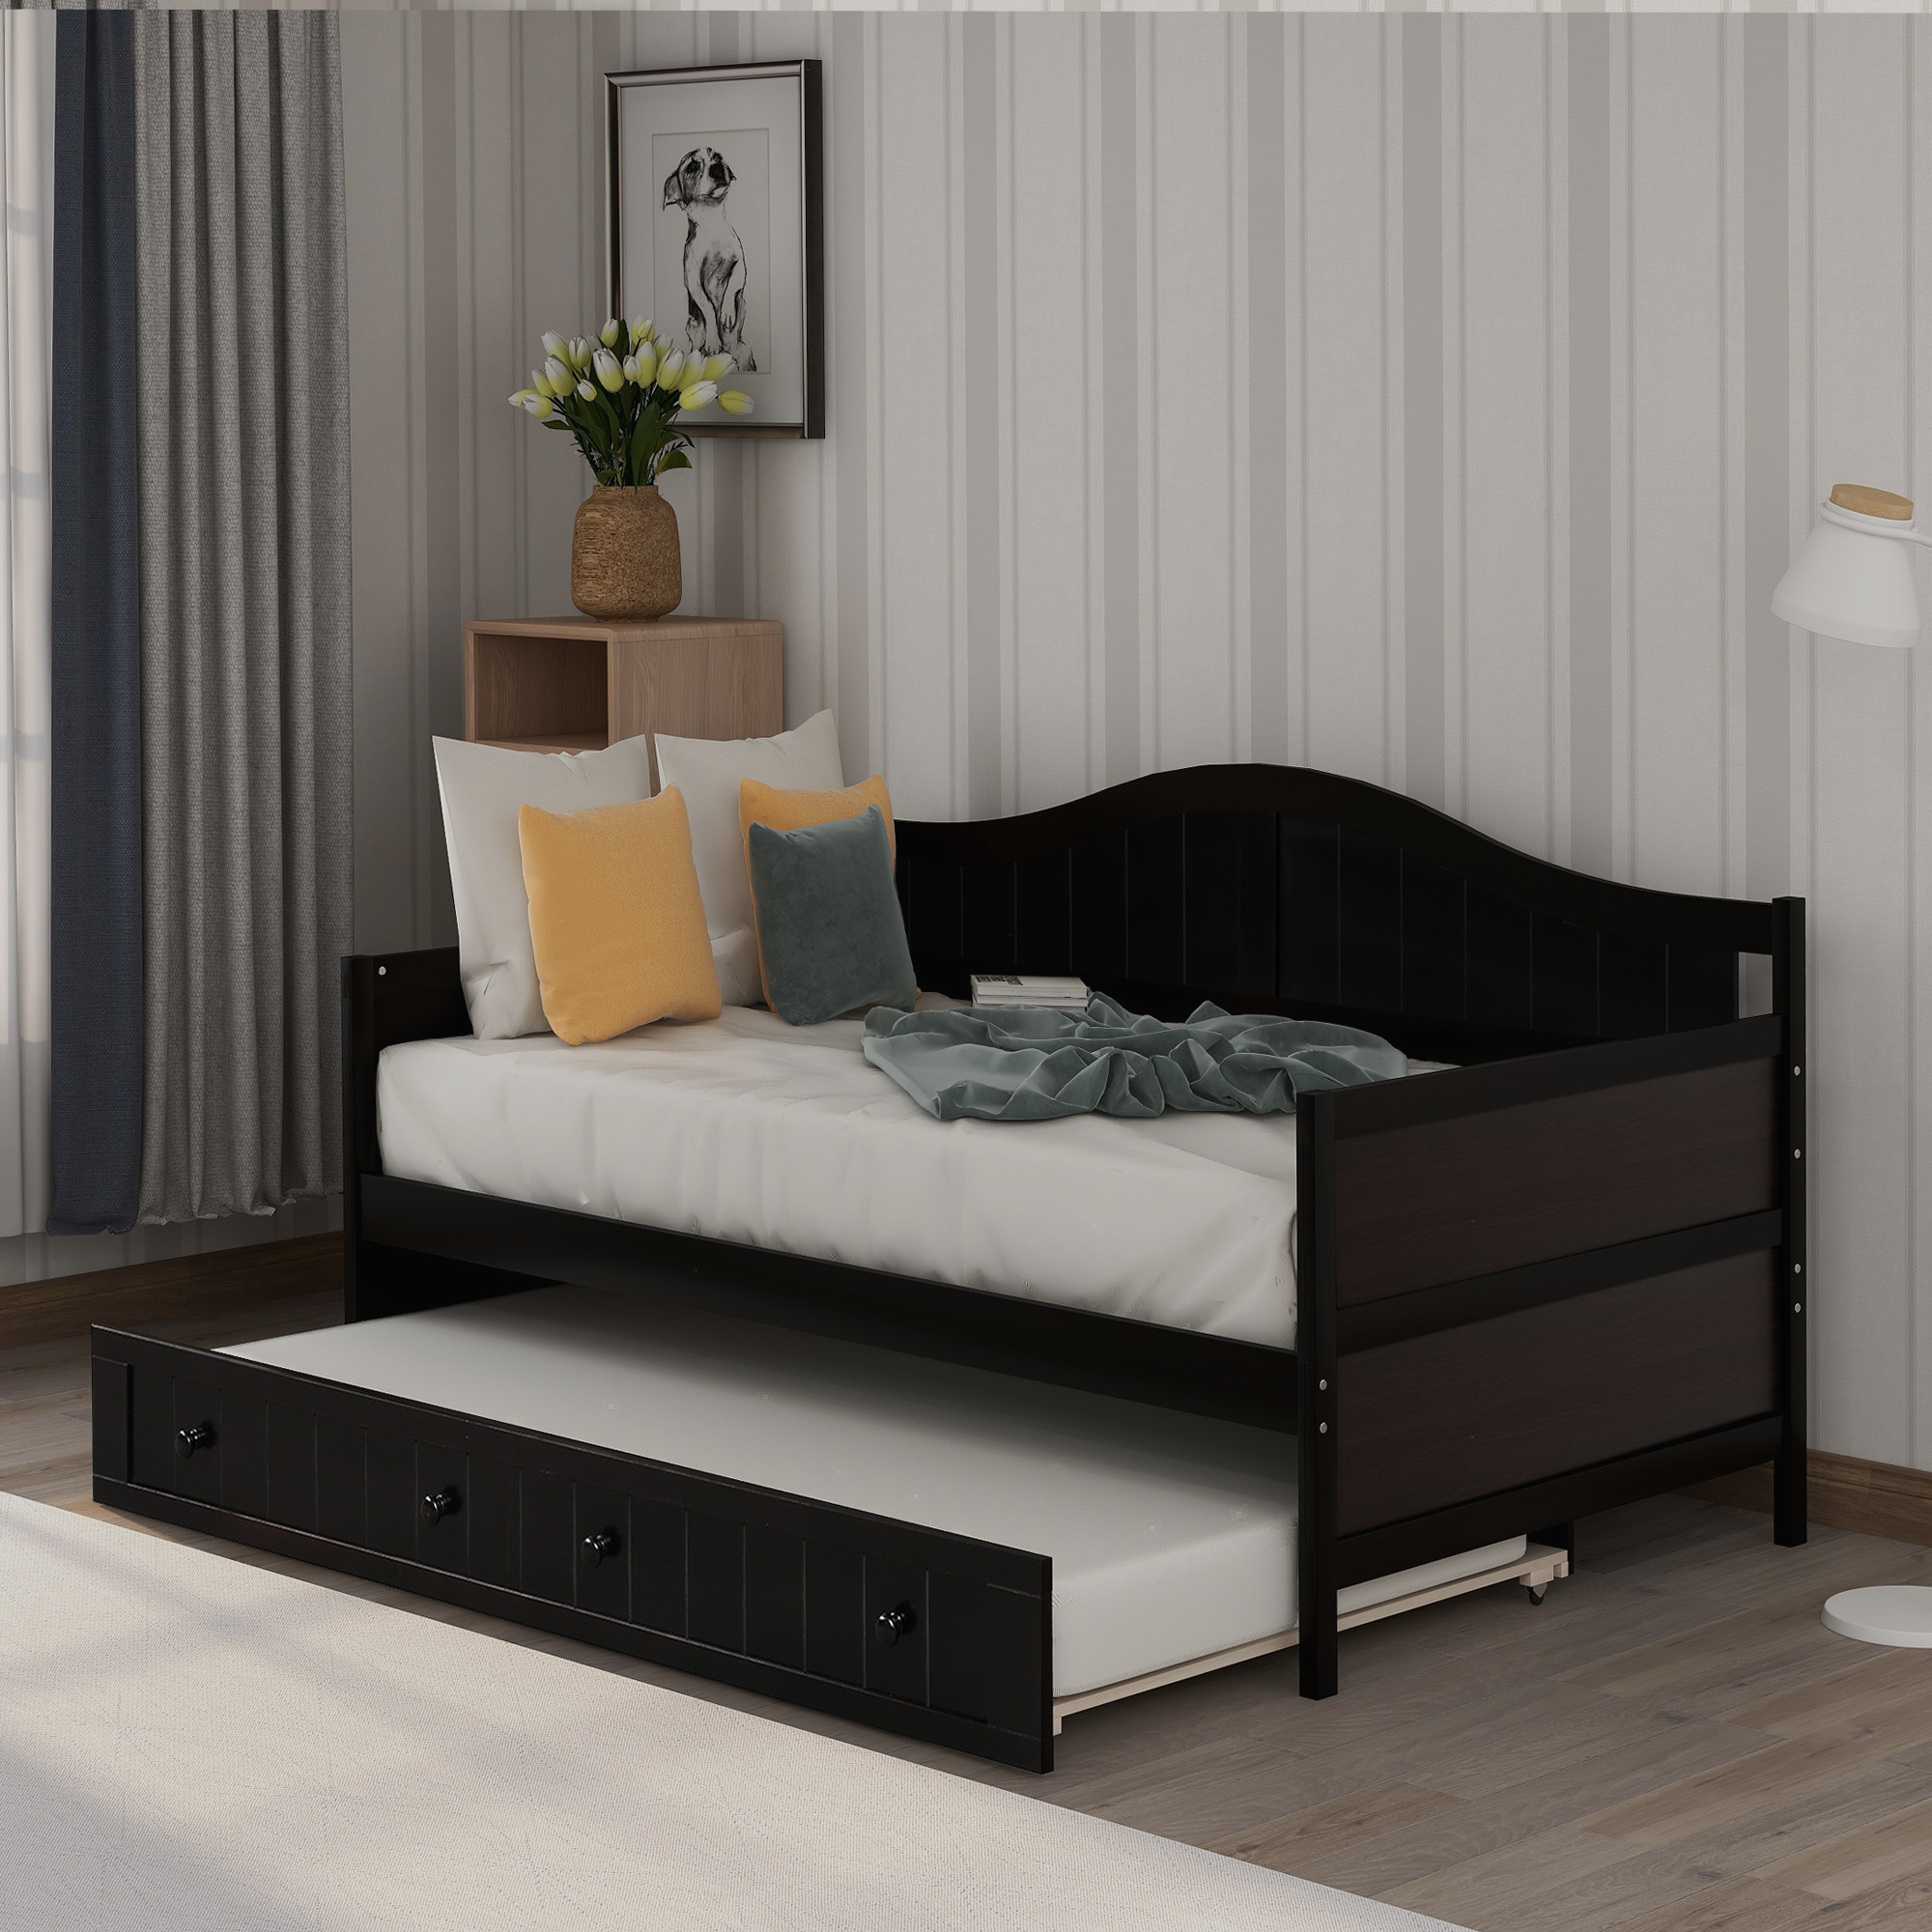 Moda Furnishings Twin Wooden Daybed, Wood Twin Trundle Bed Daybed